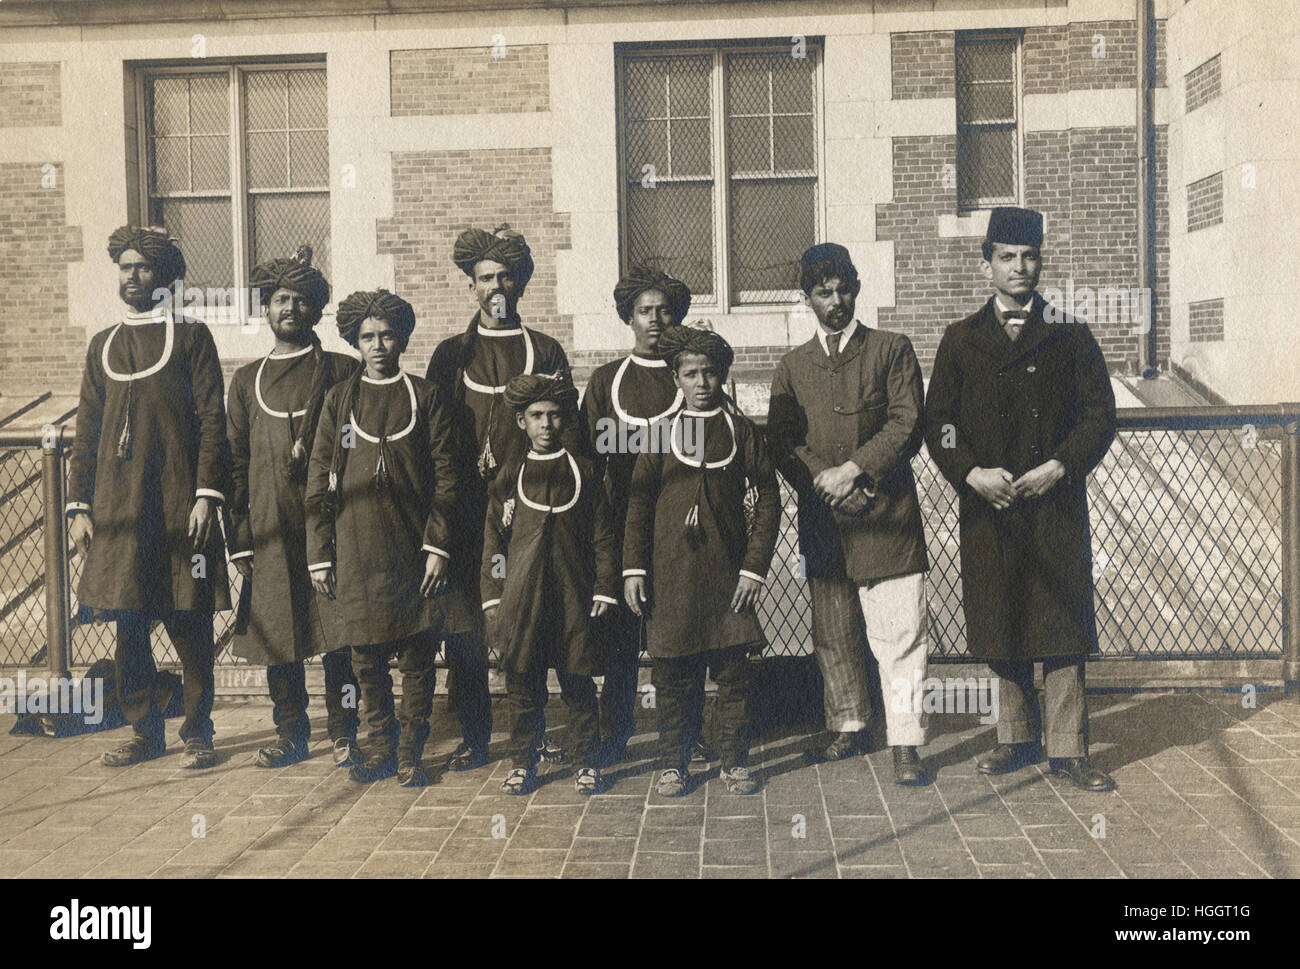 Group photograph of newly-arrived immigrants in native costumes, some with turbans, some with fezzes.  - Ellis Island Immigration Station 1902-1913 Stock Photo